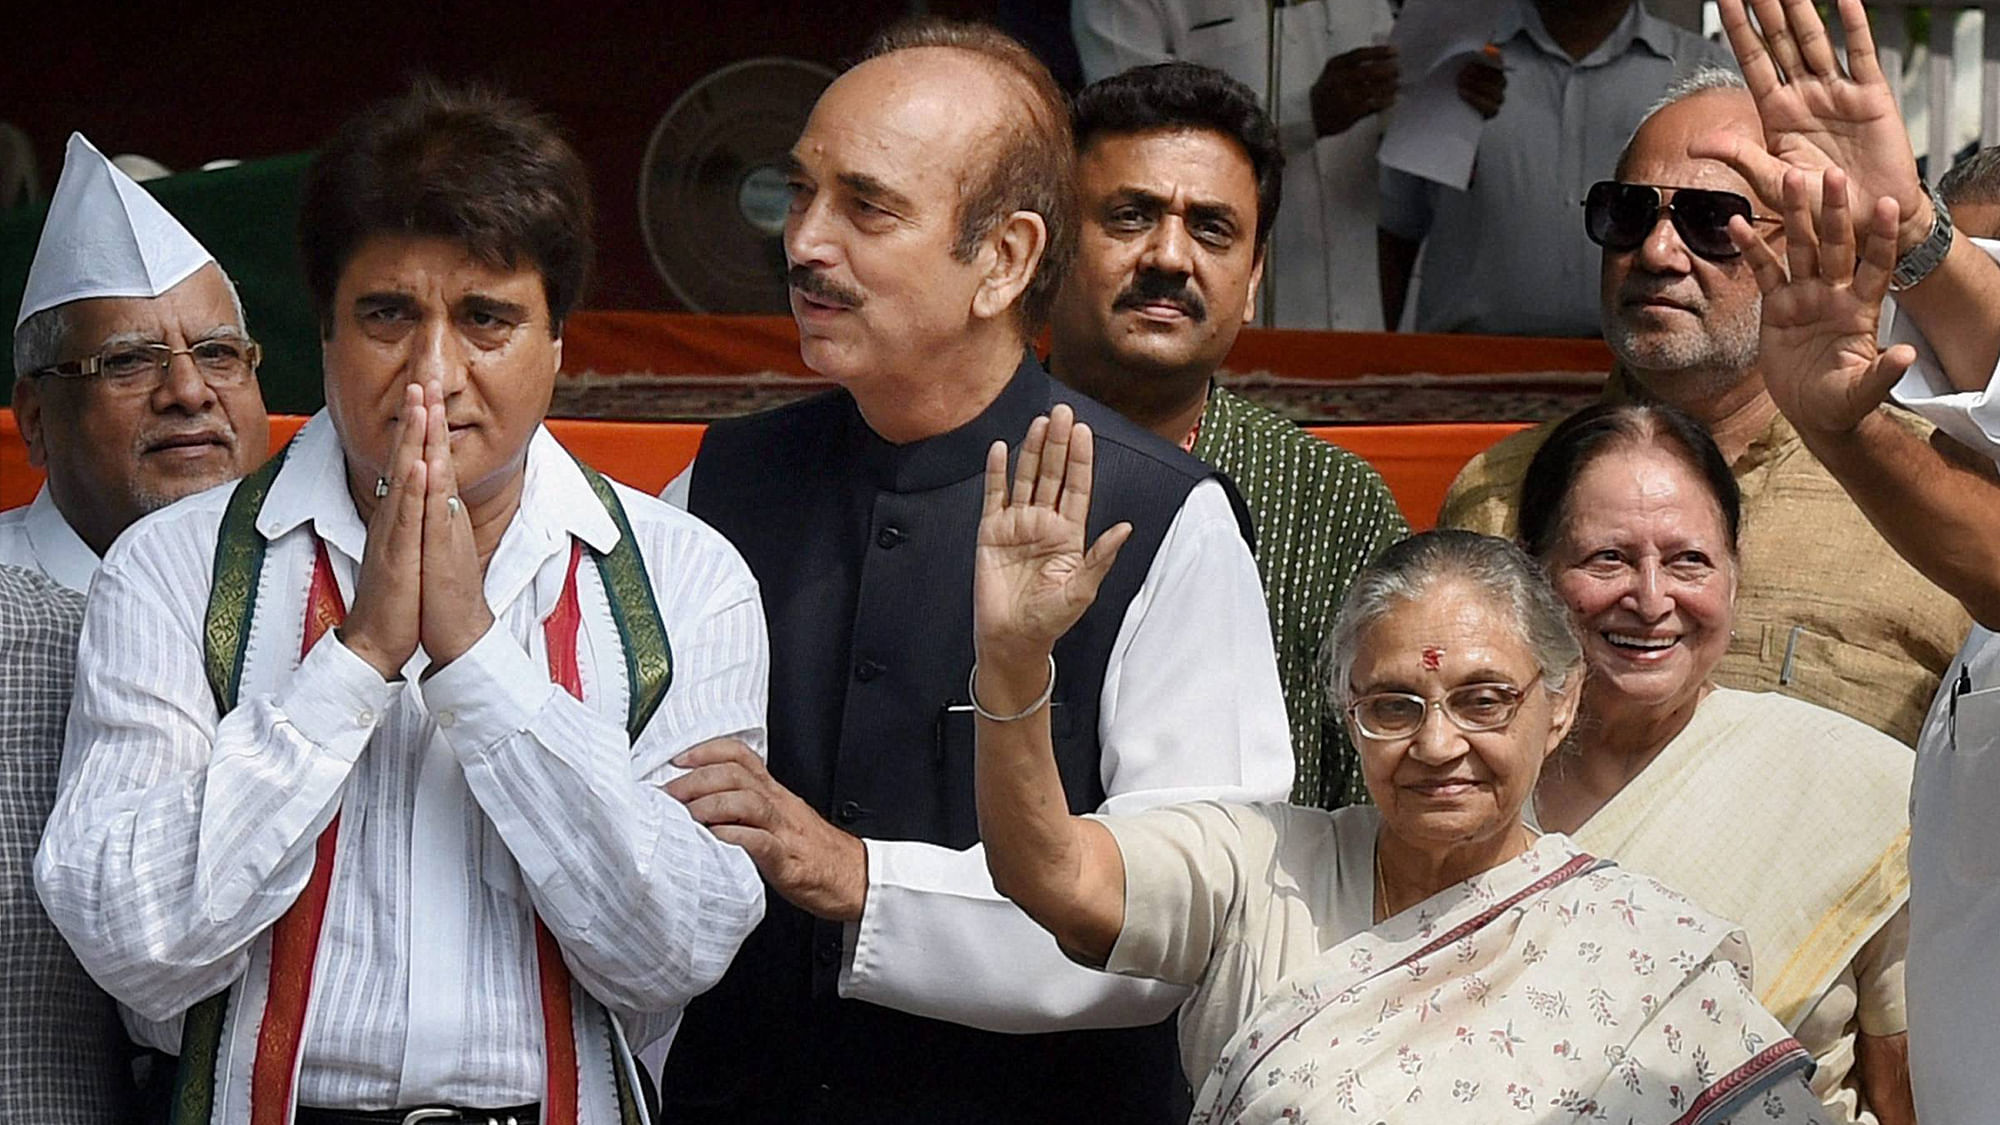 Congress’ Chief Ministerial face Sheila Dikshit, General secretary in charge of party affairs in UP, Ghulam Nabi Azad and state unit chief Raj Babbar. (Photo: PTI)